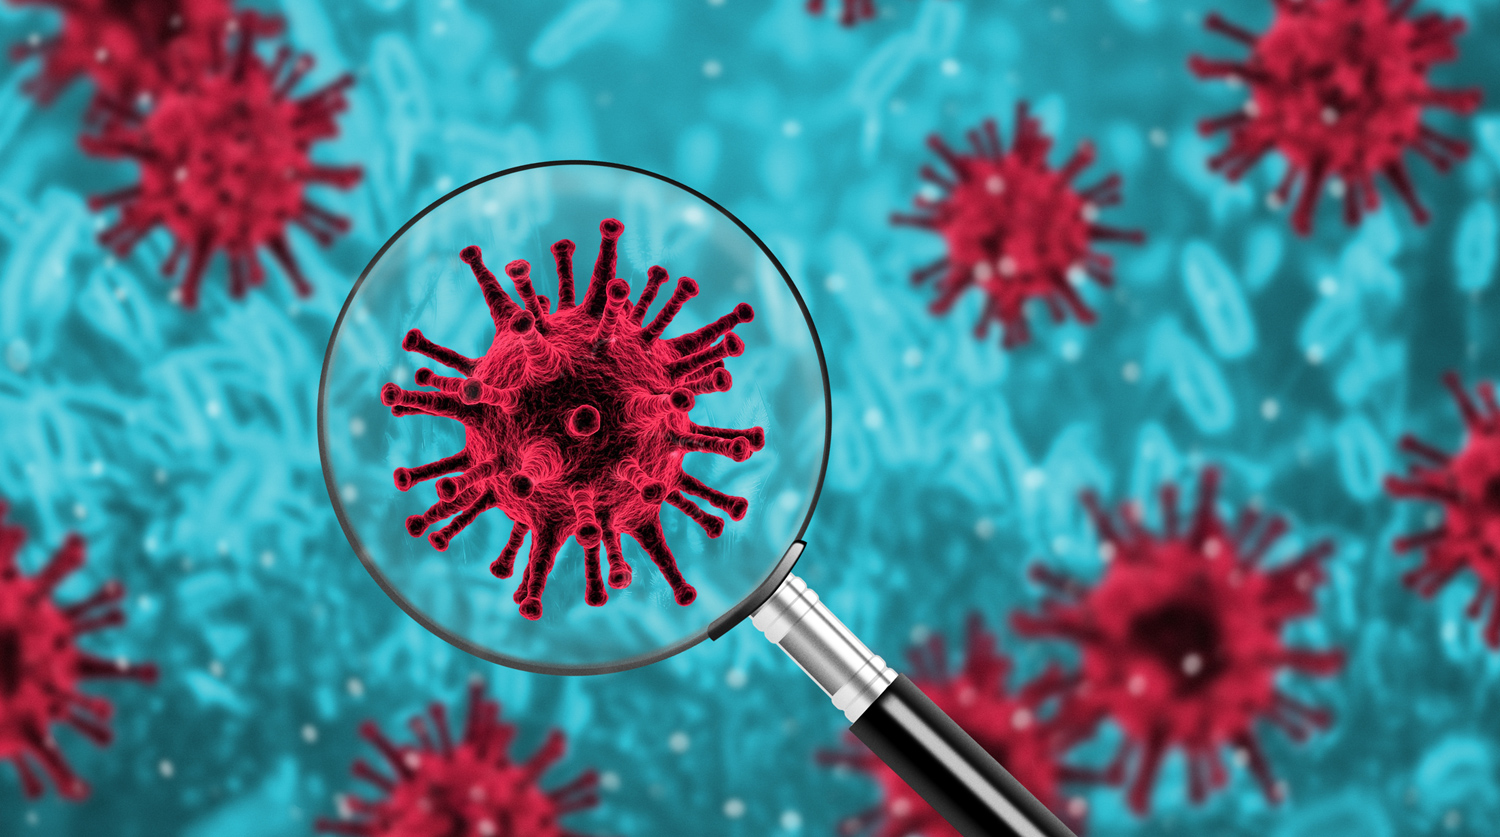 Epidemic concept with magnifying glass over virus bacterium